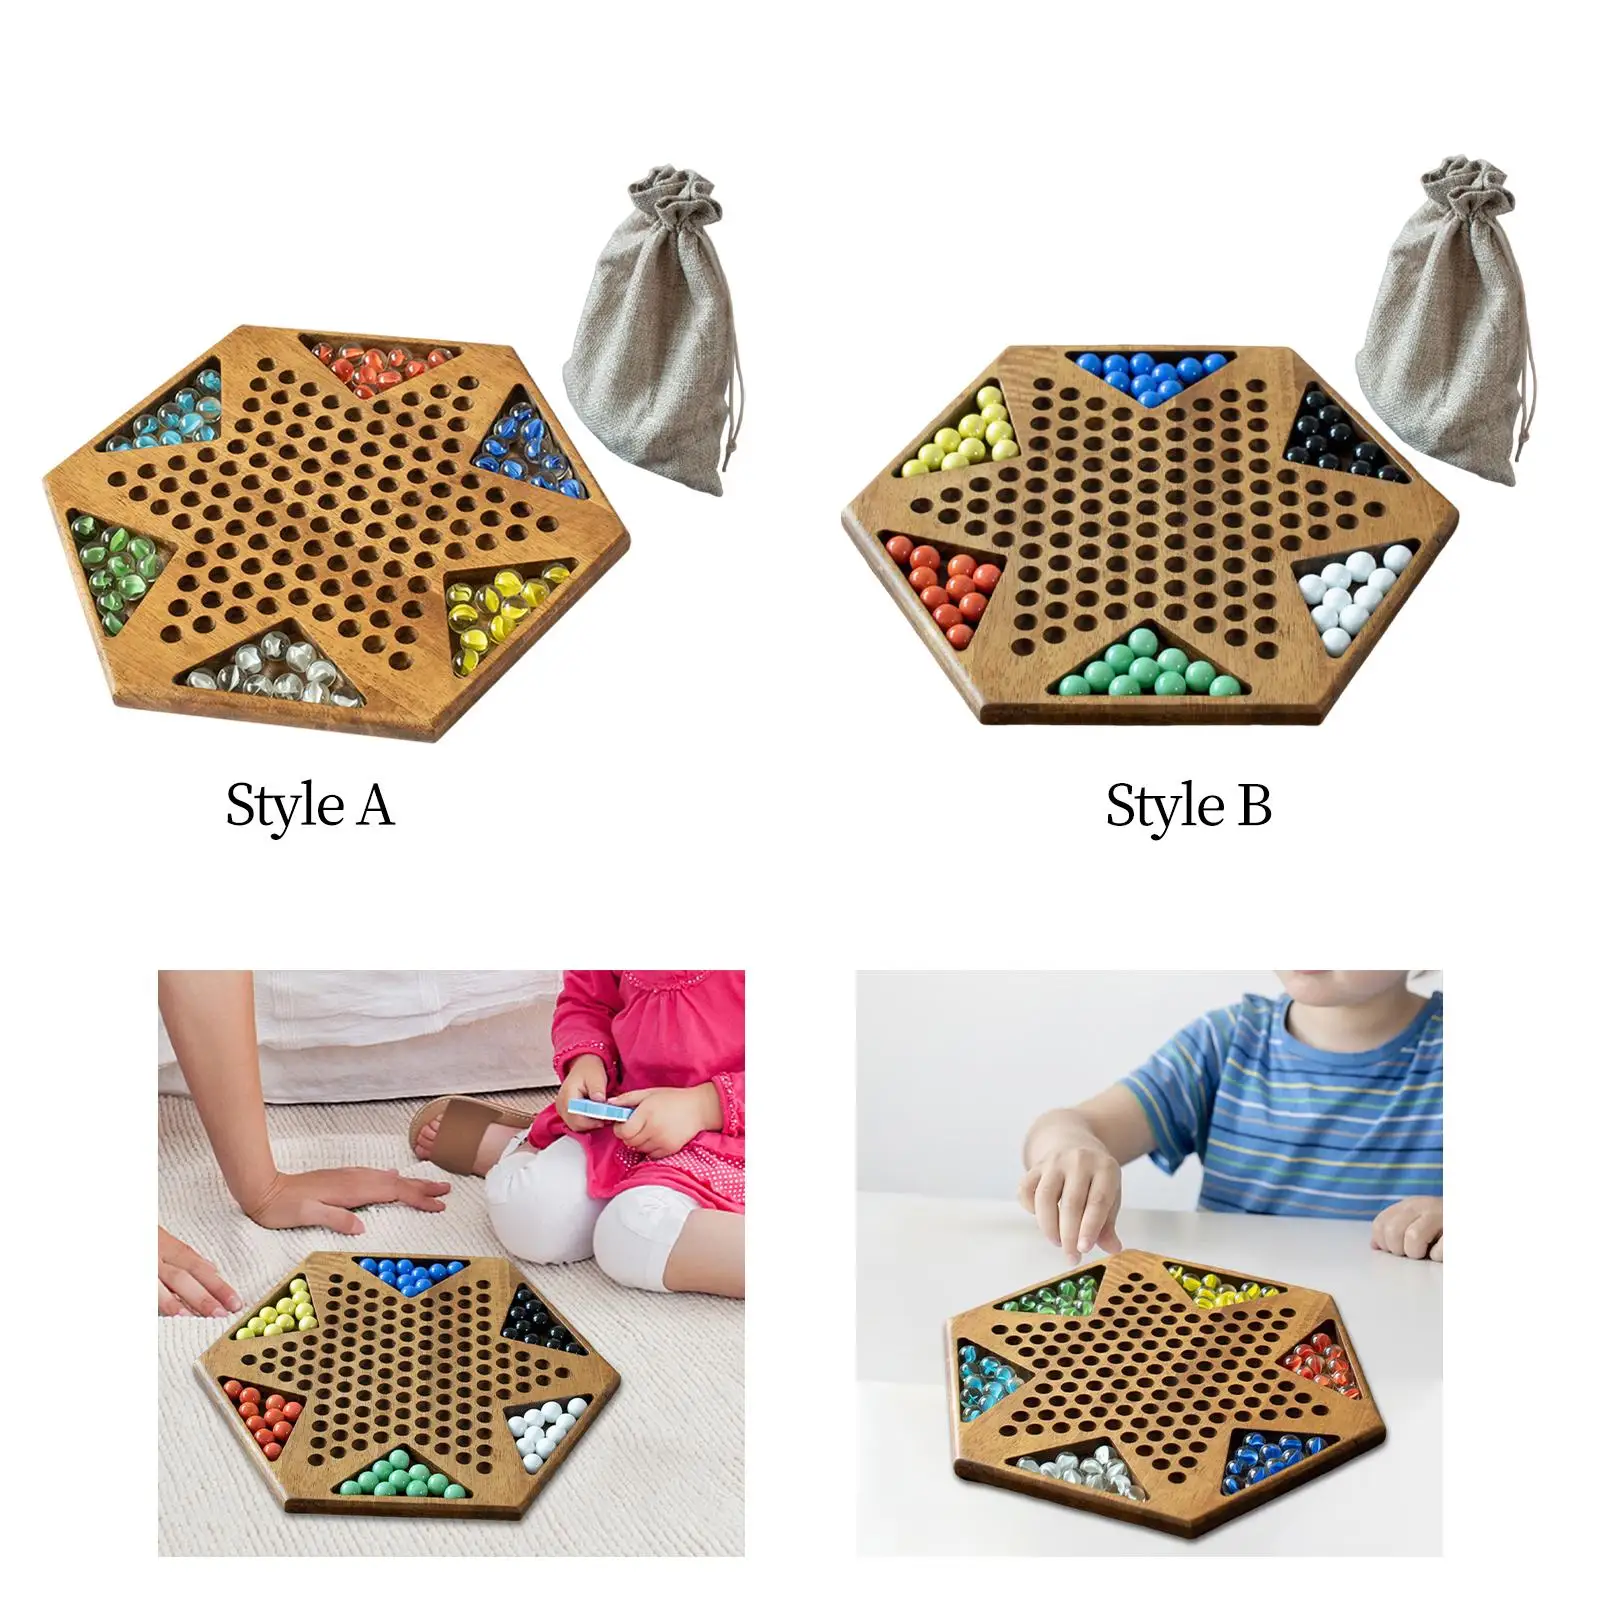 Wooden Chinese Checkers Game Educational Learning Toy with Storage Bag Game for Kids Children